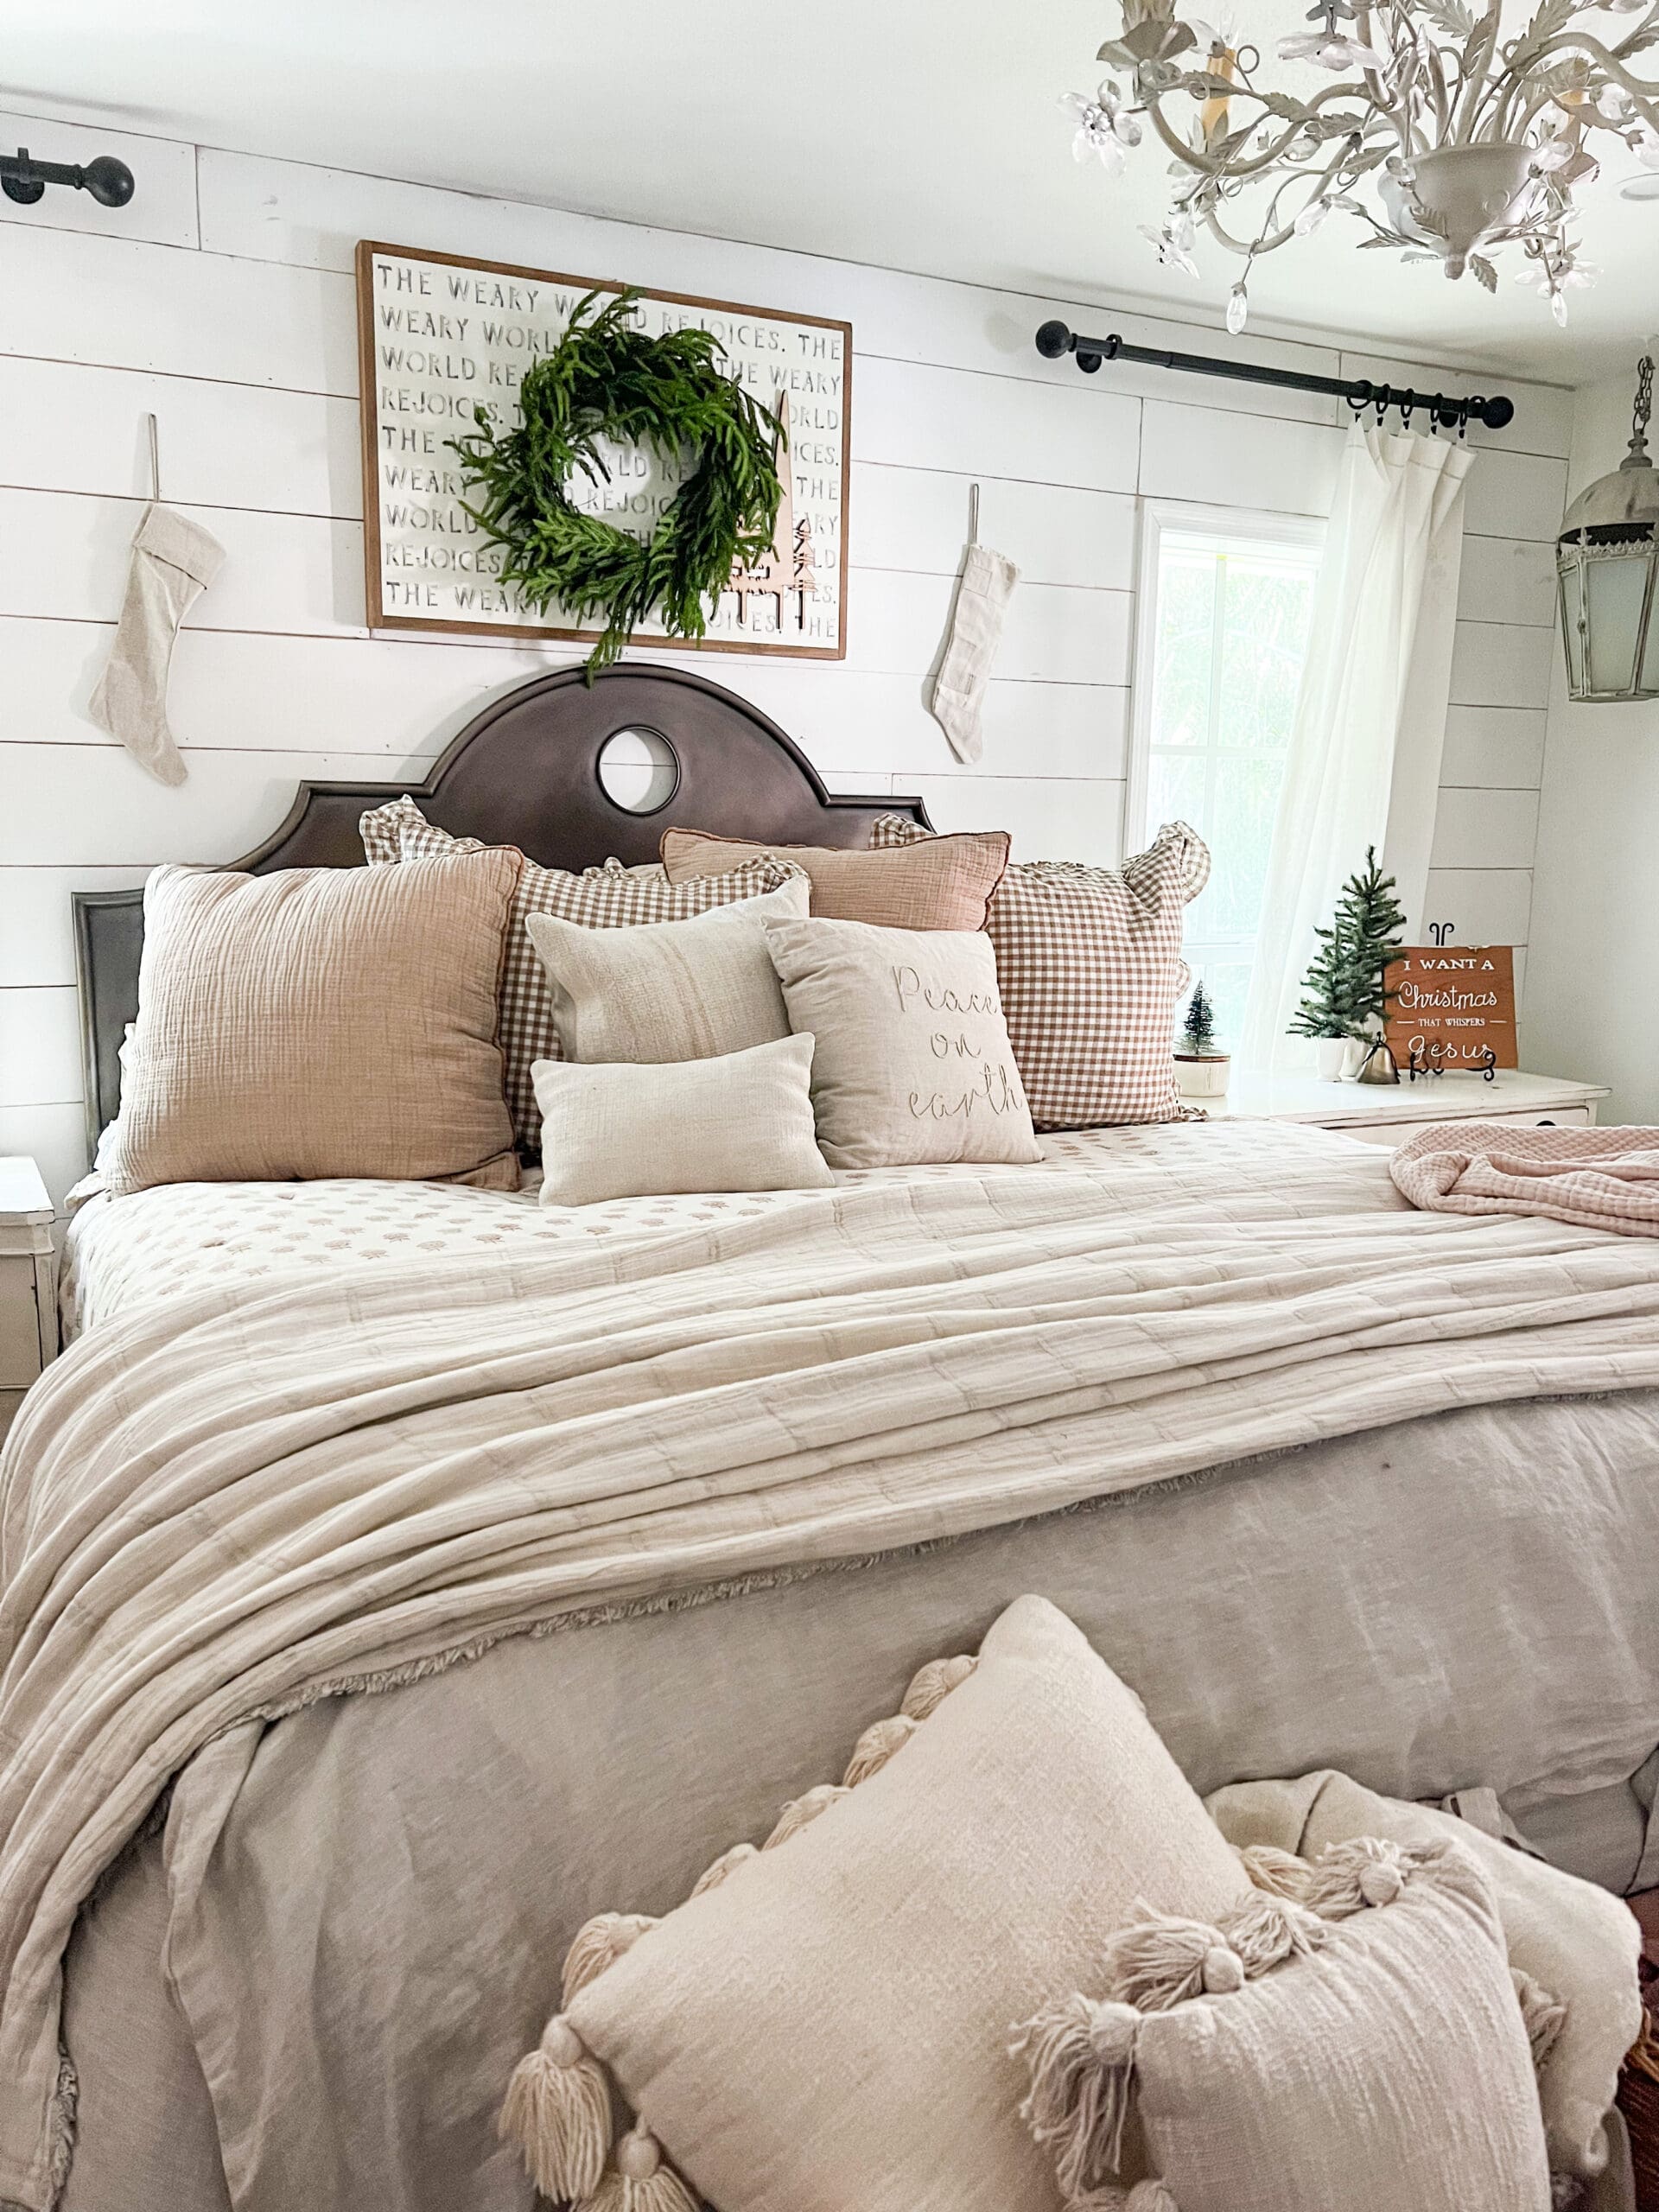 image of a neutral bed and nightstands styled for Christmas